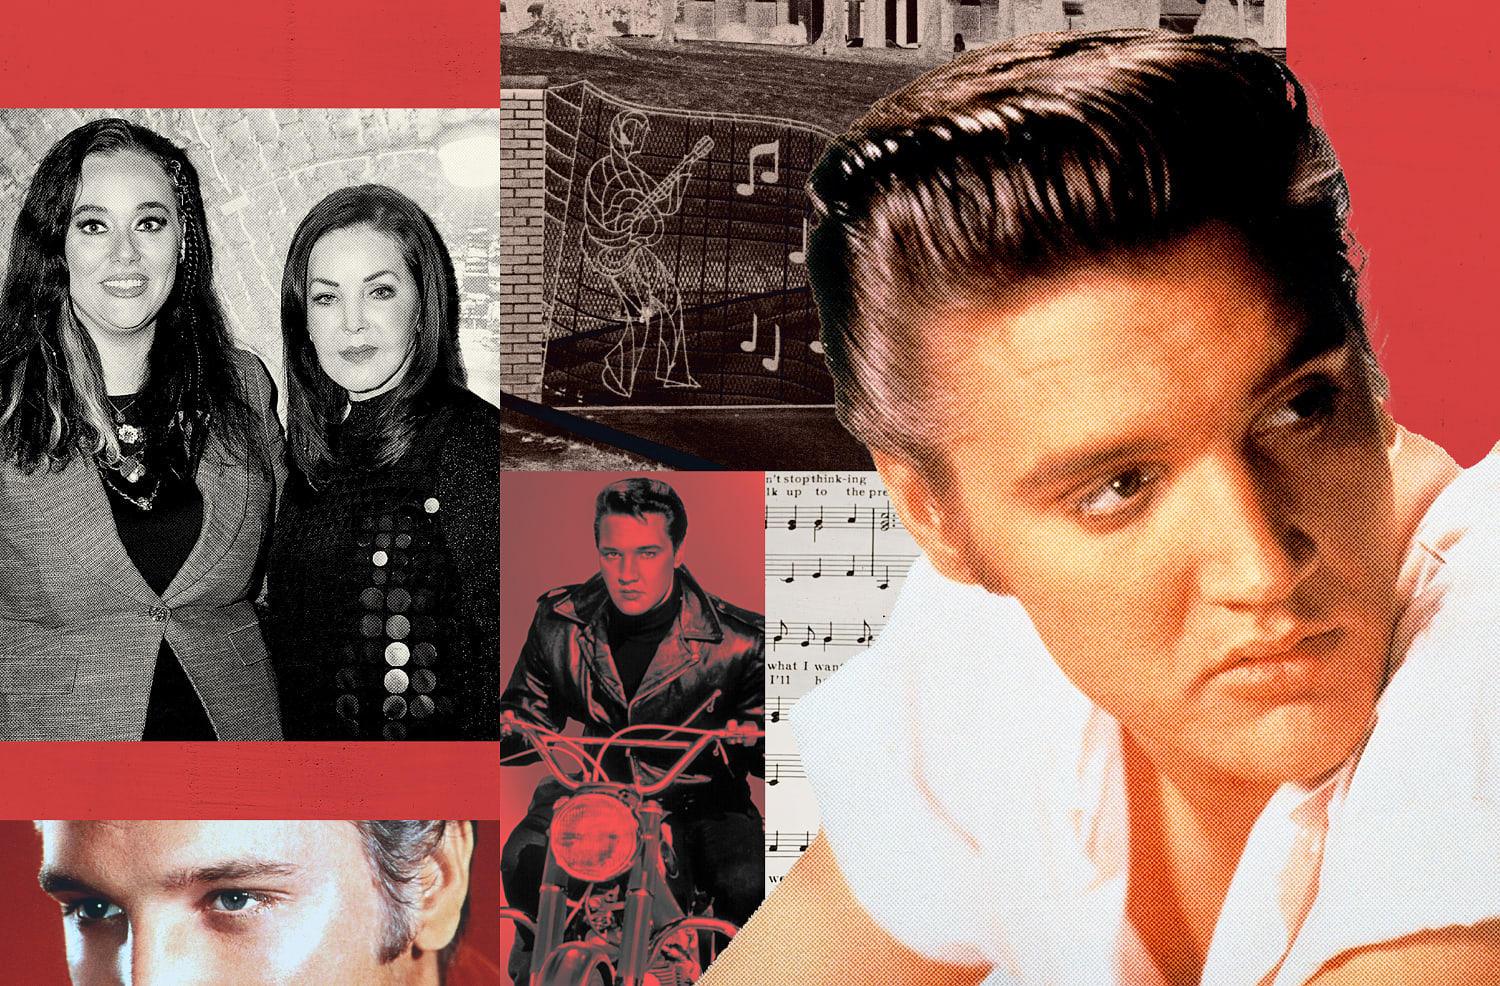 Graceland questions authenticity of Elvis memorabilia sold by auction house with ties to Priscilla Presley